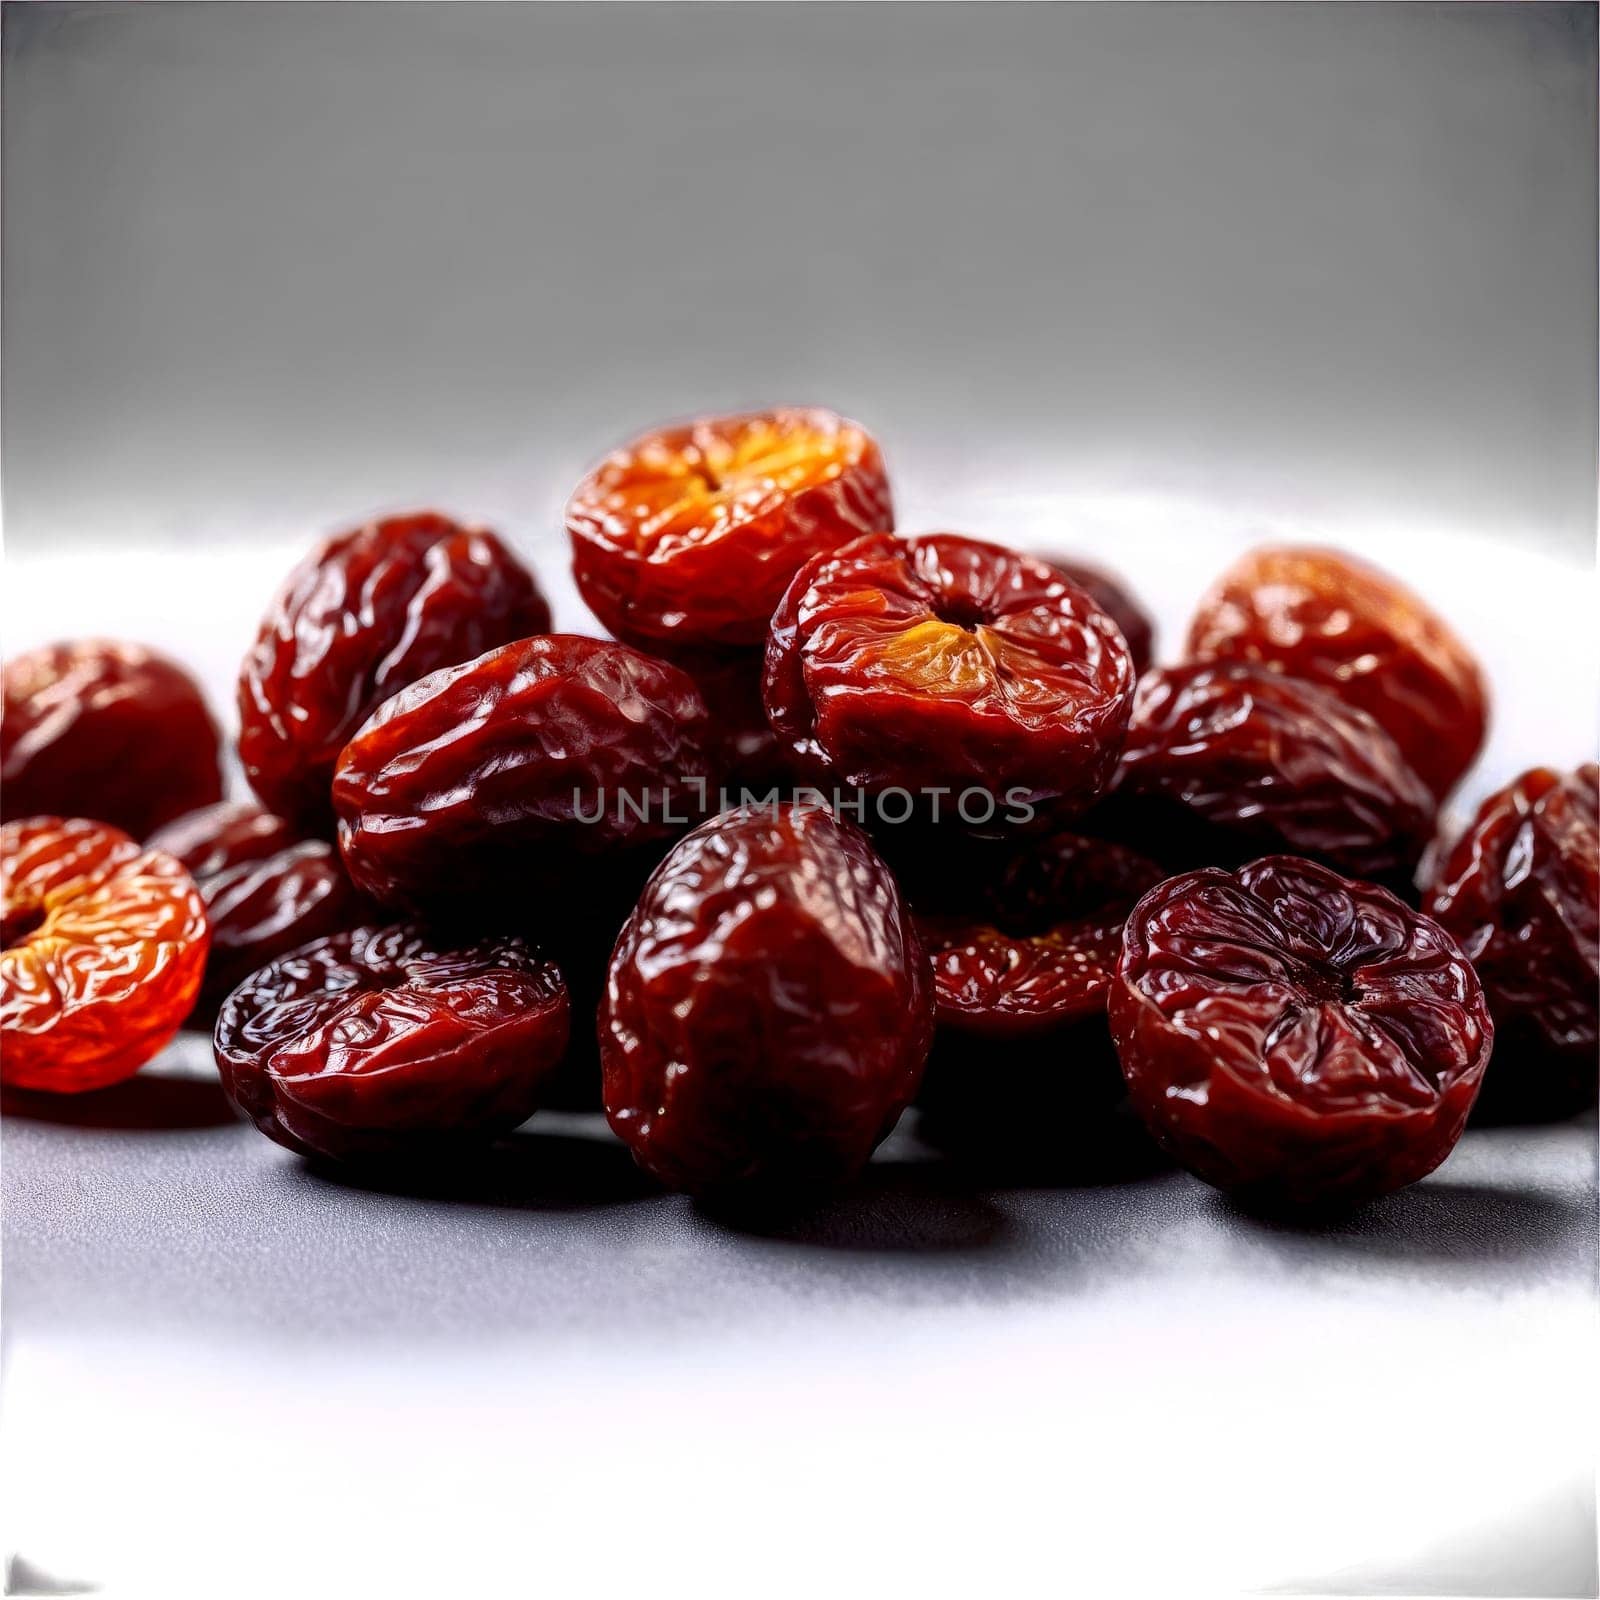 Dried jujube fruits deep red with a wrinkled texture bouncing joyfully as if celebrating by panophotograph